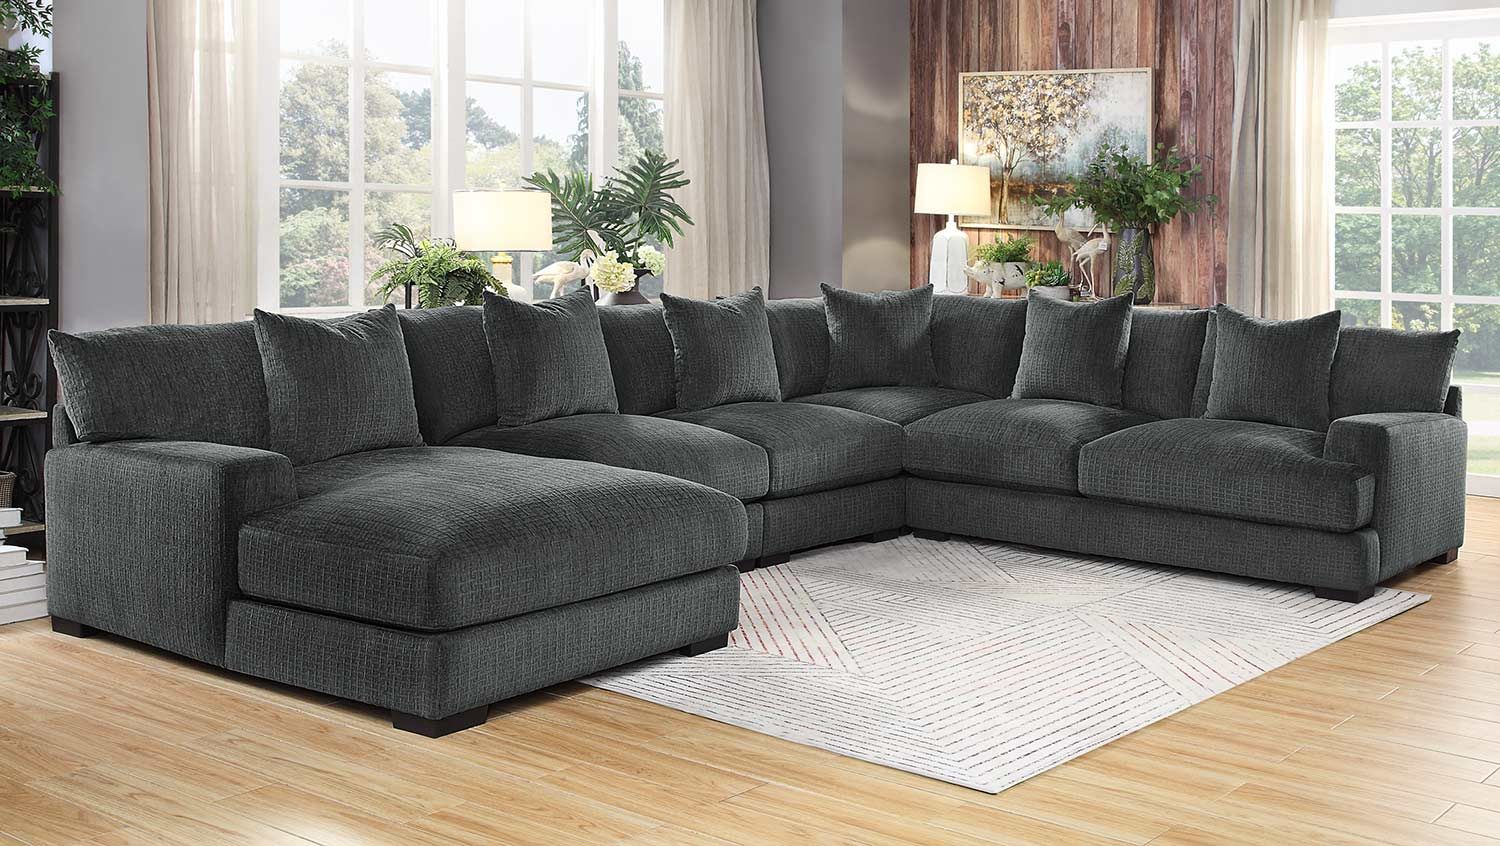 Homelegance Worchester Sectional Sofa Set – Dark Gray 9857dg Sofa Set Within Dark Grey Polyester Sofa Couches (Gallery 1 of 20)